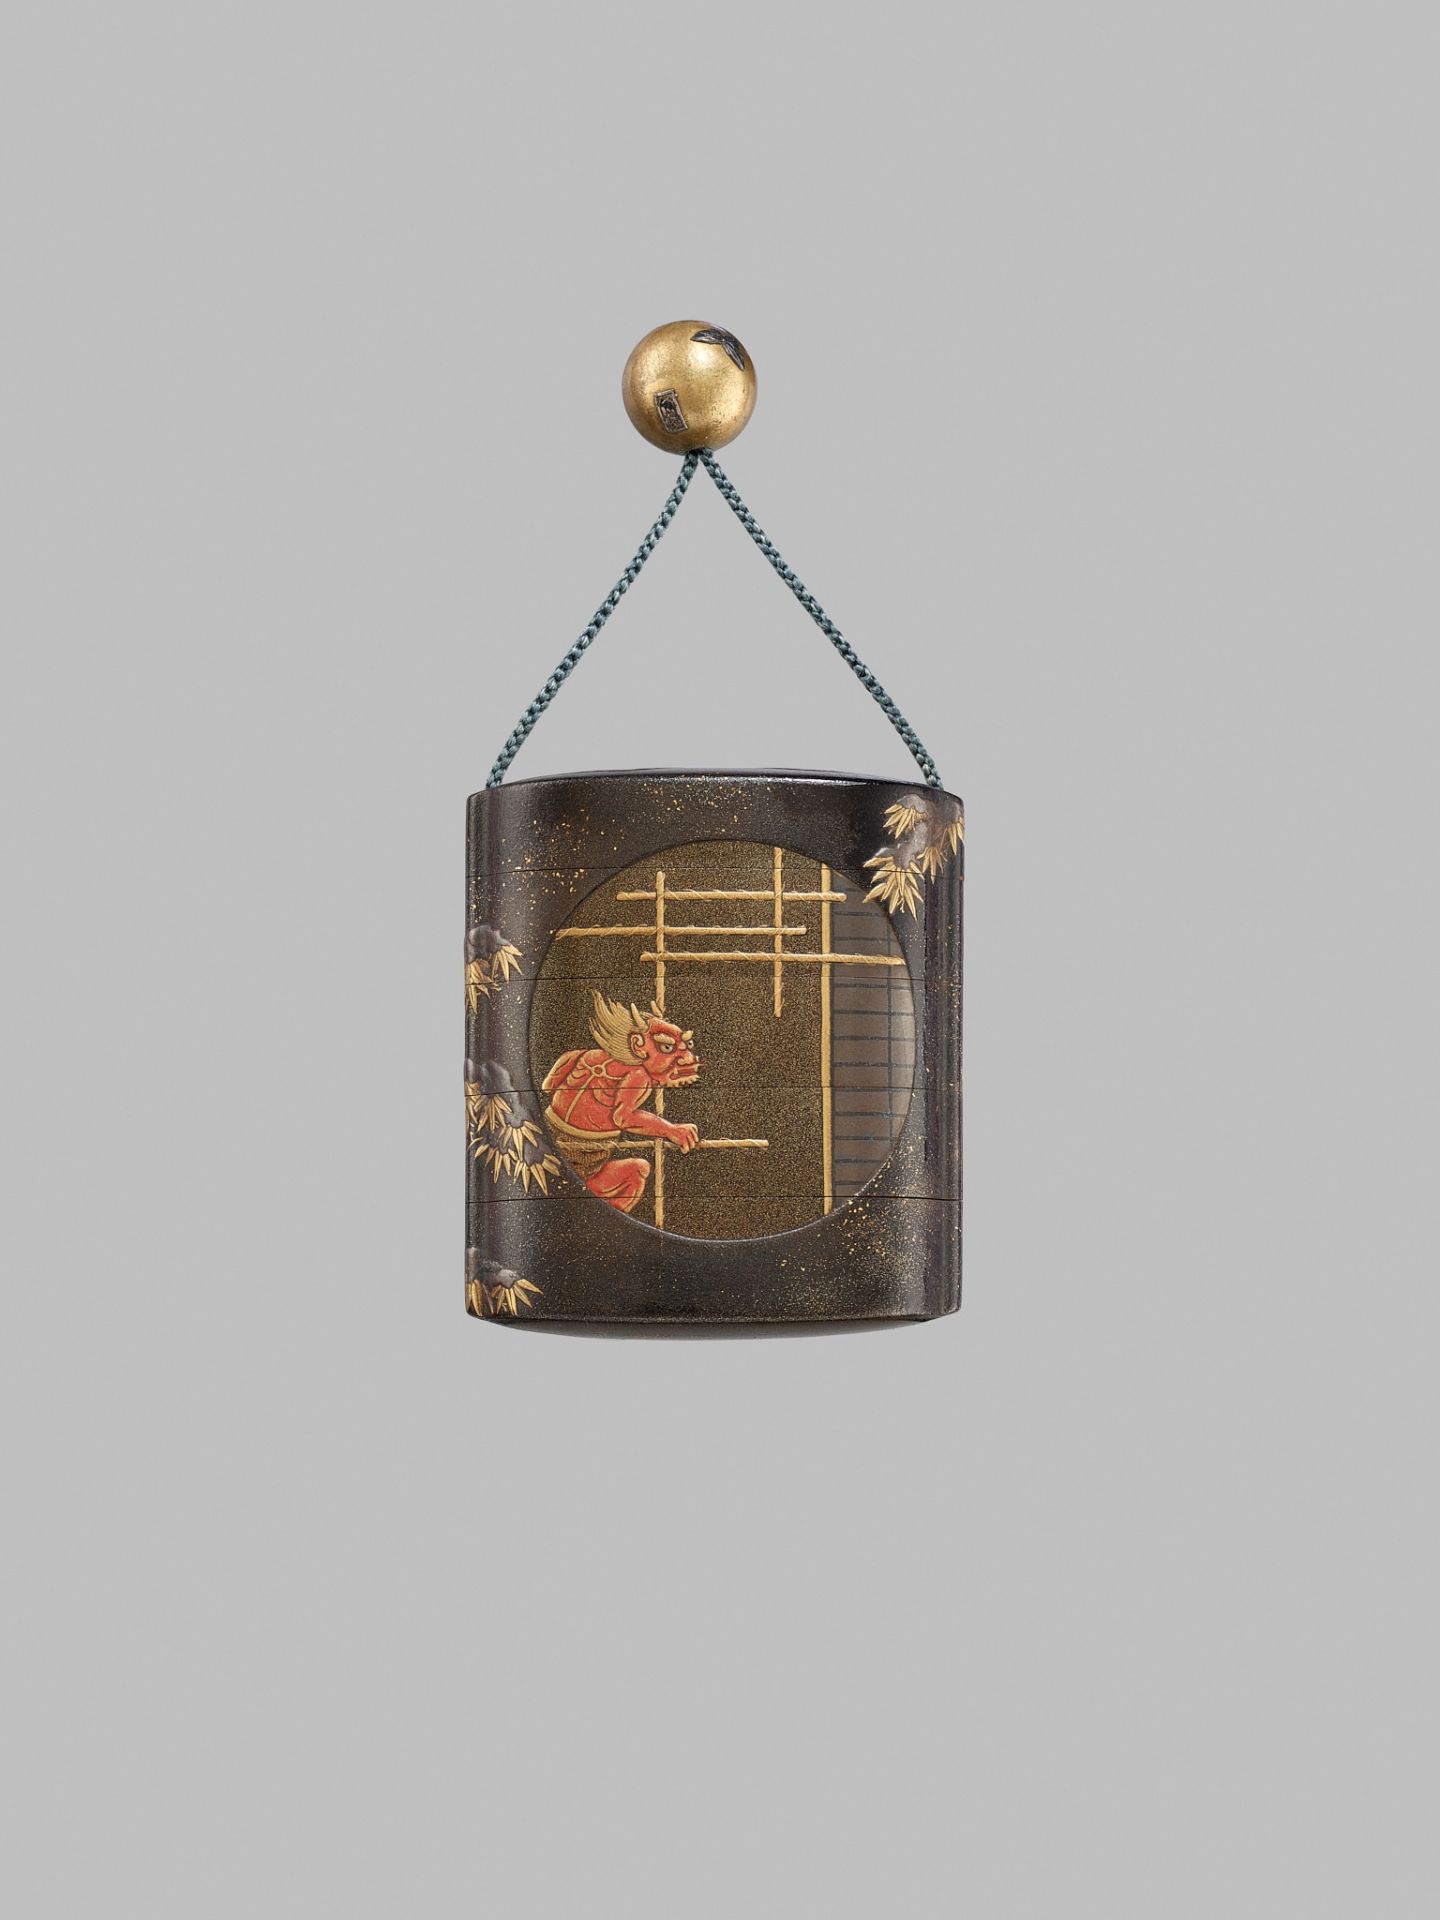 YOYUSAI: AN EXQUISITE SMALL LACQUER FOUR-CASE INRO DEPICTING OKAME AND ONI AT SETSUBUN - Image 5 of 8